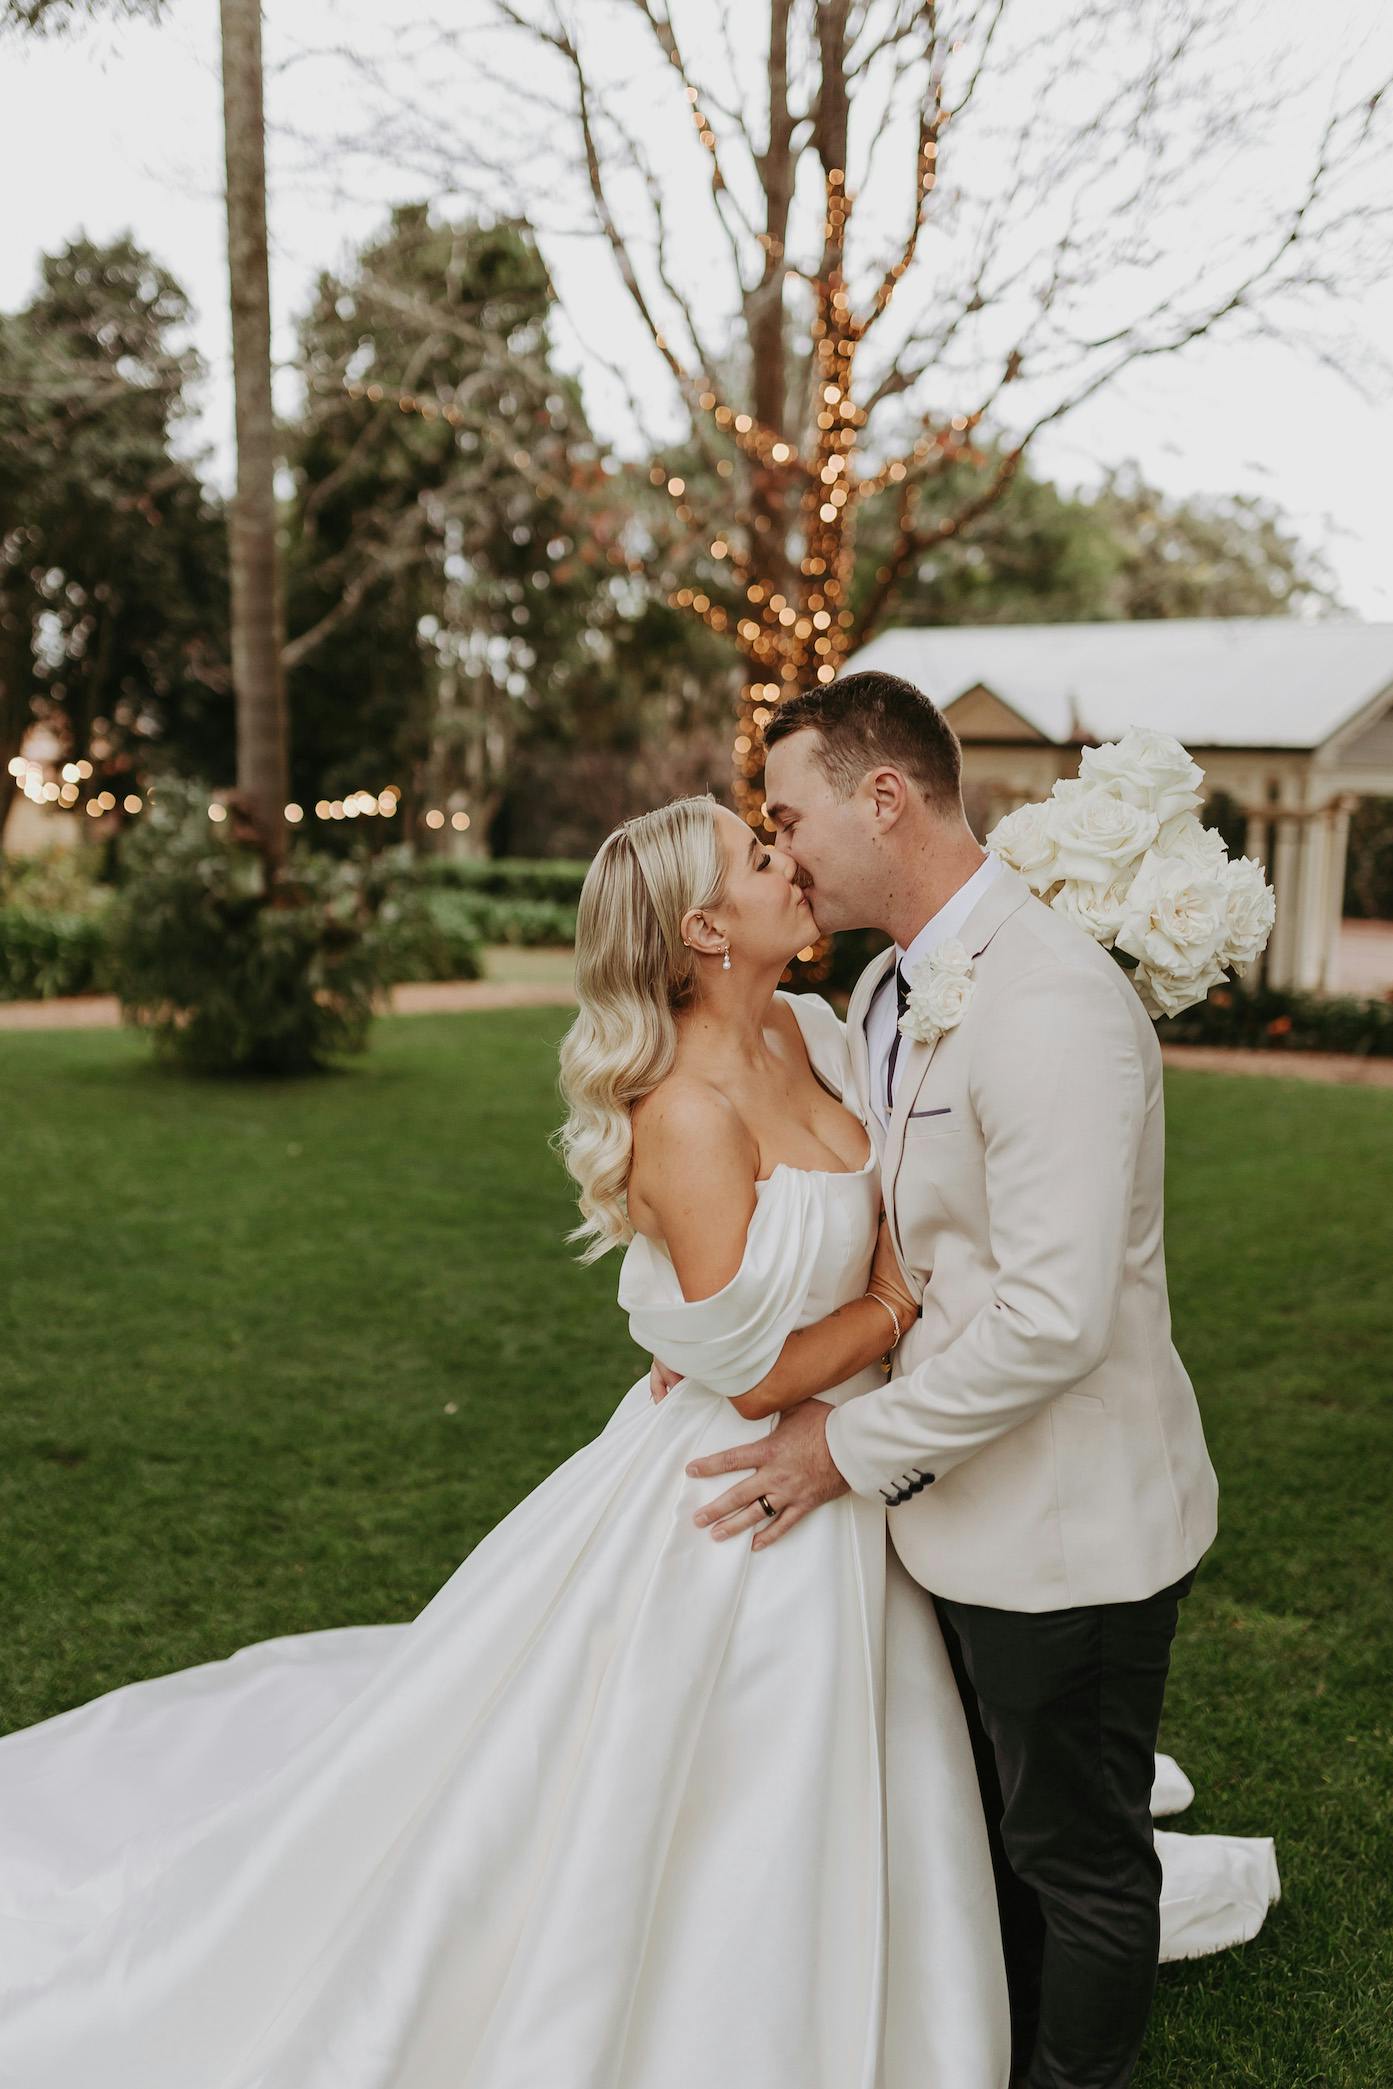 A bride and groom share a kiss on a lawn in front of a tree wrapped with lights. The bride is wearing an off-shoulder white wedding dress and holding a bouquet of white flowers, while the groom is dressed in a light-colored suit.